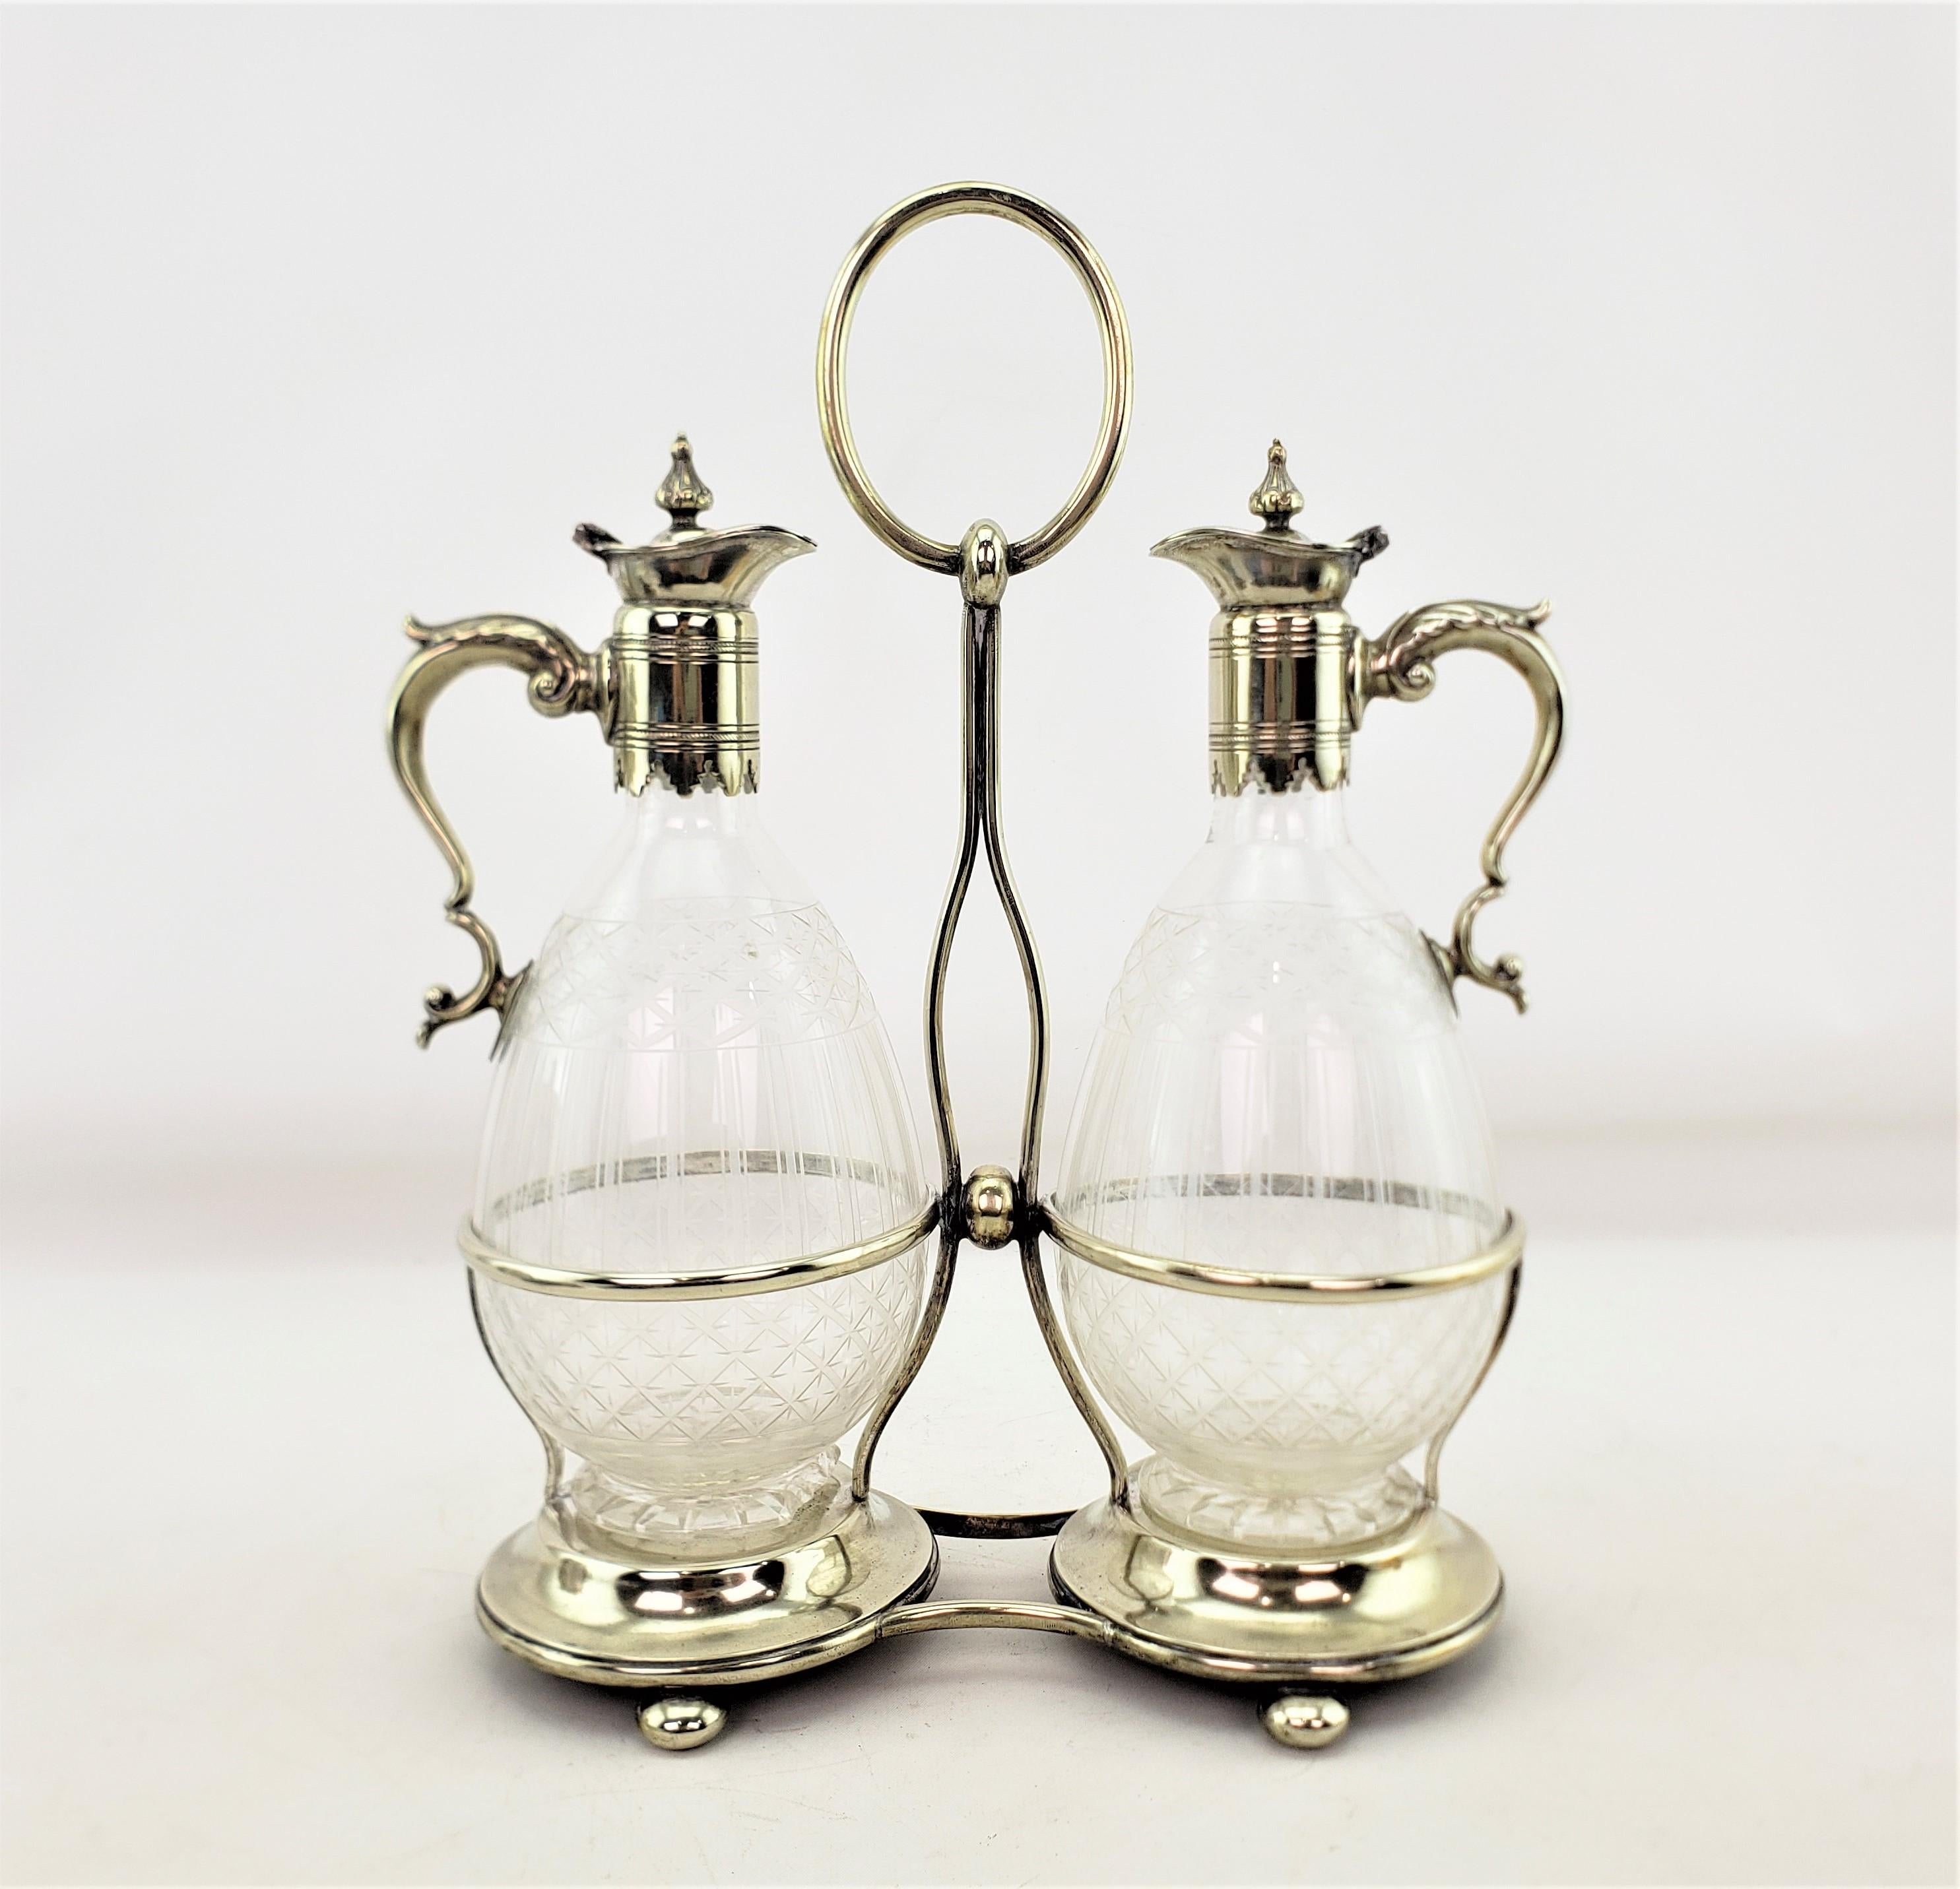 Antique Pair of Silver Plated & Etched Glass Claret Jugs, or Sherry Decanters For Sale 2